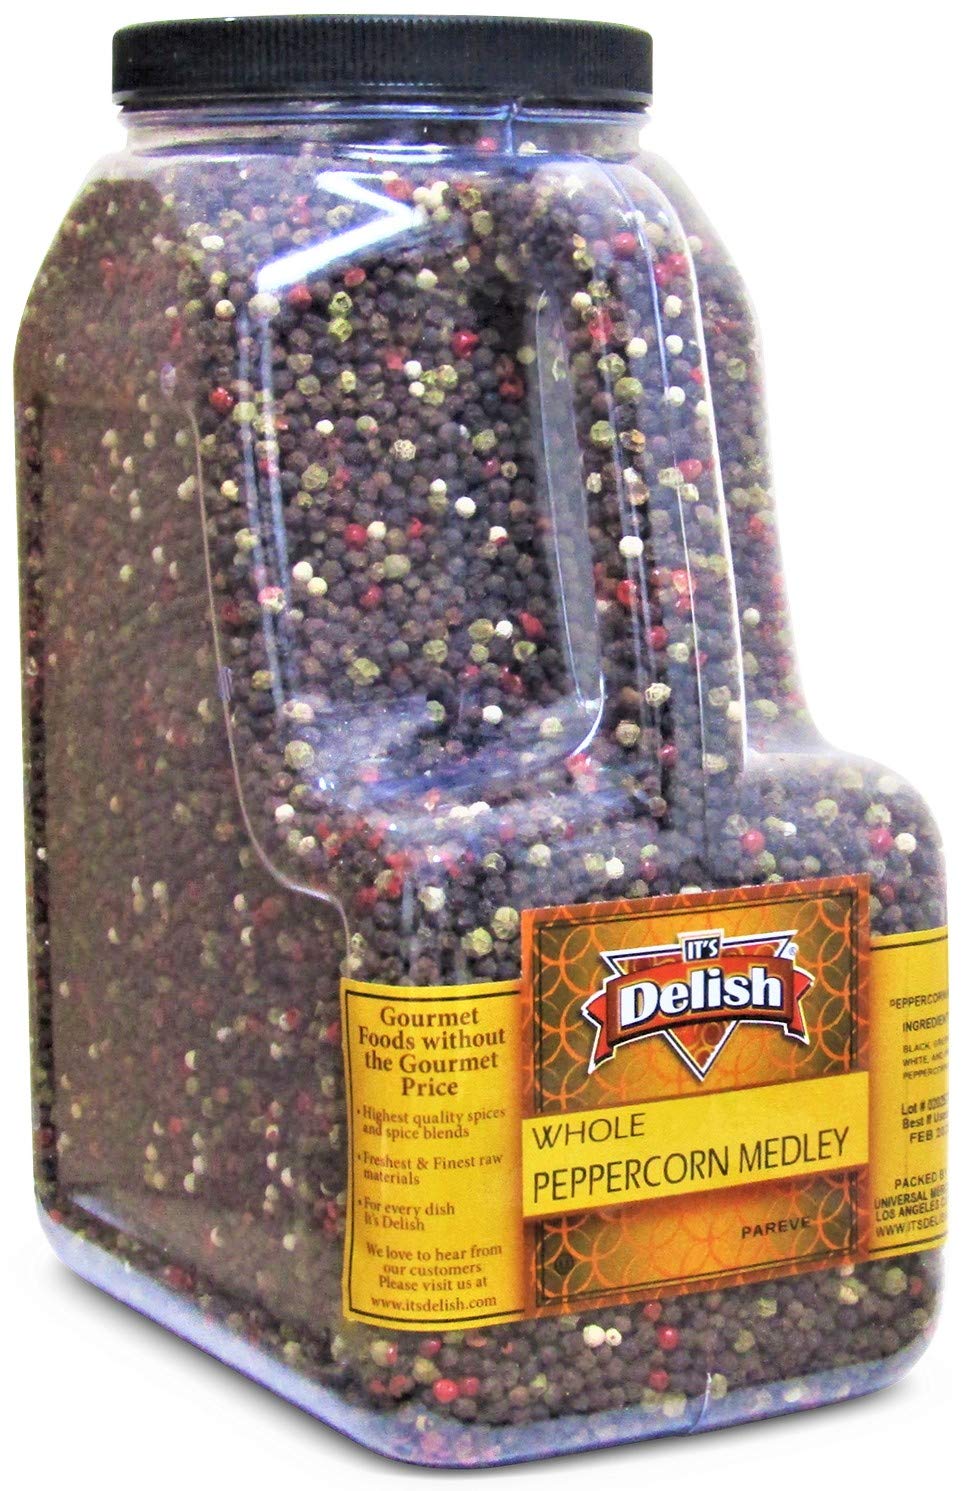 Whole Peppercorn Medley by It's Delish – 6 LBS Gallon Size Jug with Handle – Whole Black, Green, White & Pink Peppercorn Blend - Dried Multicol...